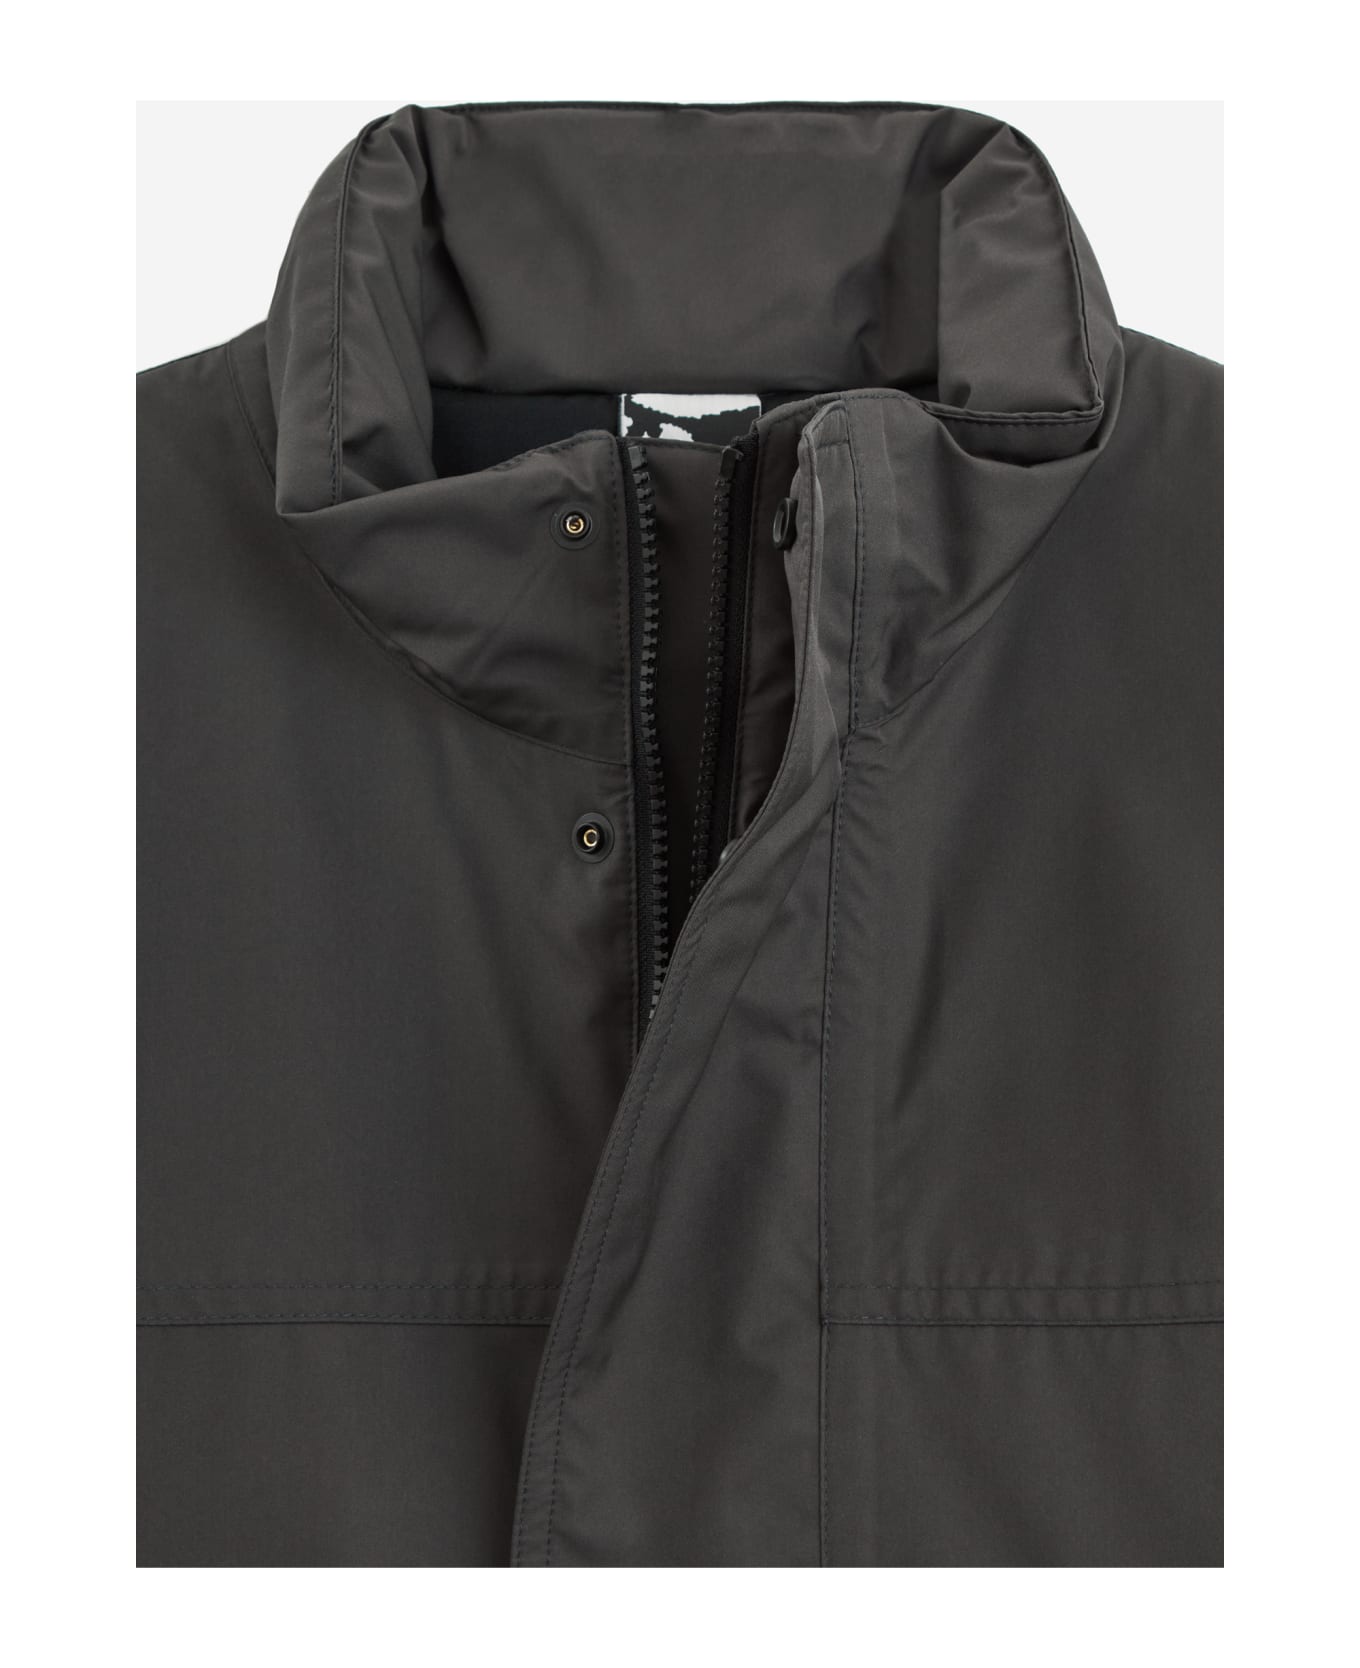 GR10K Insulated Padded Jacket - grey